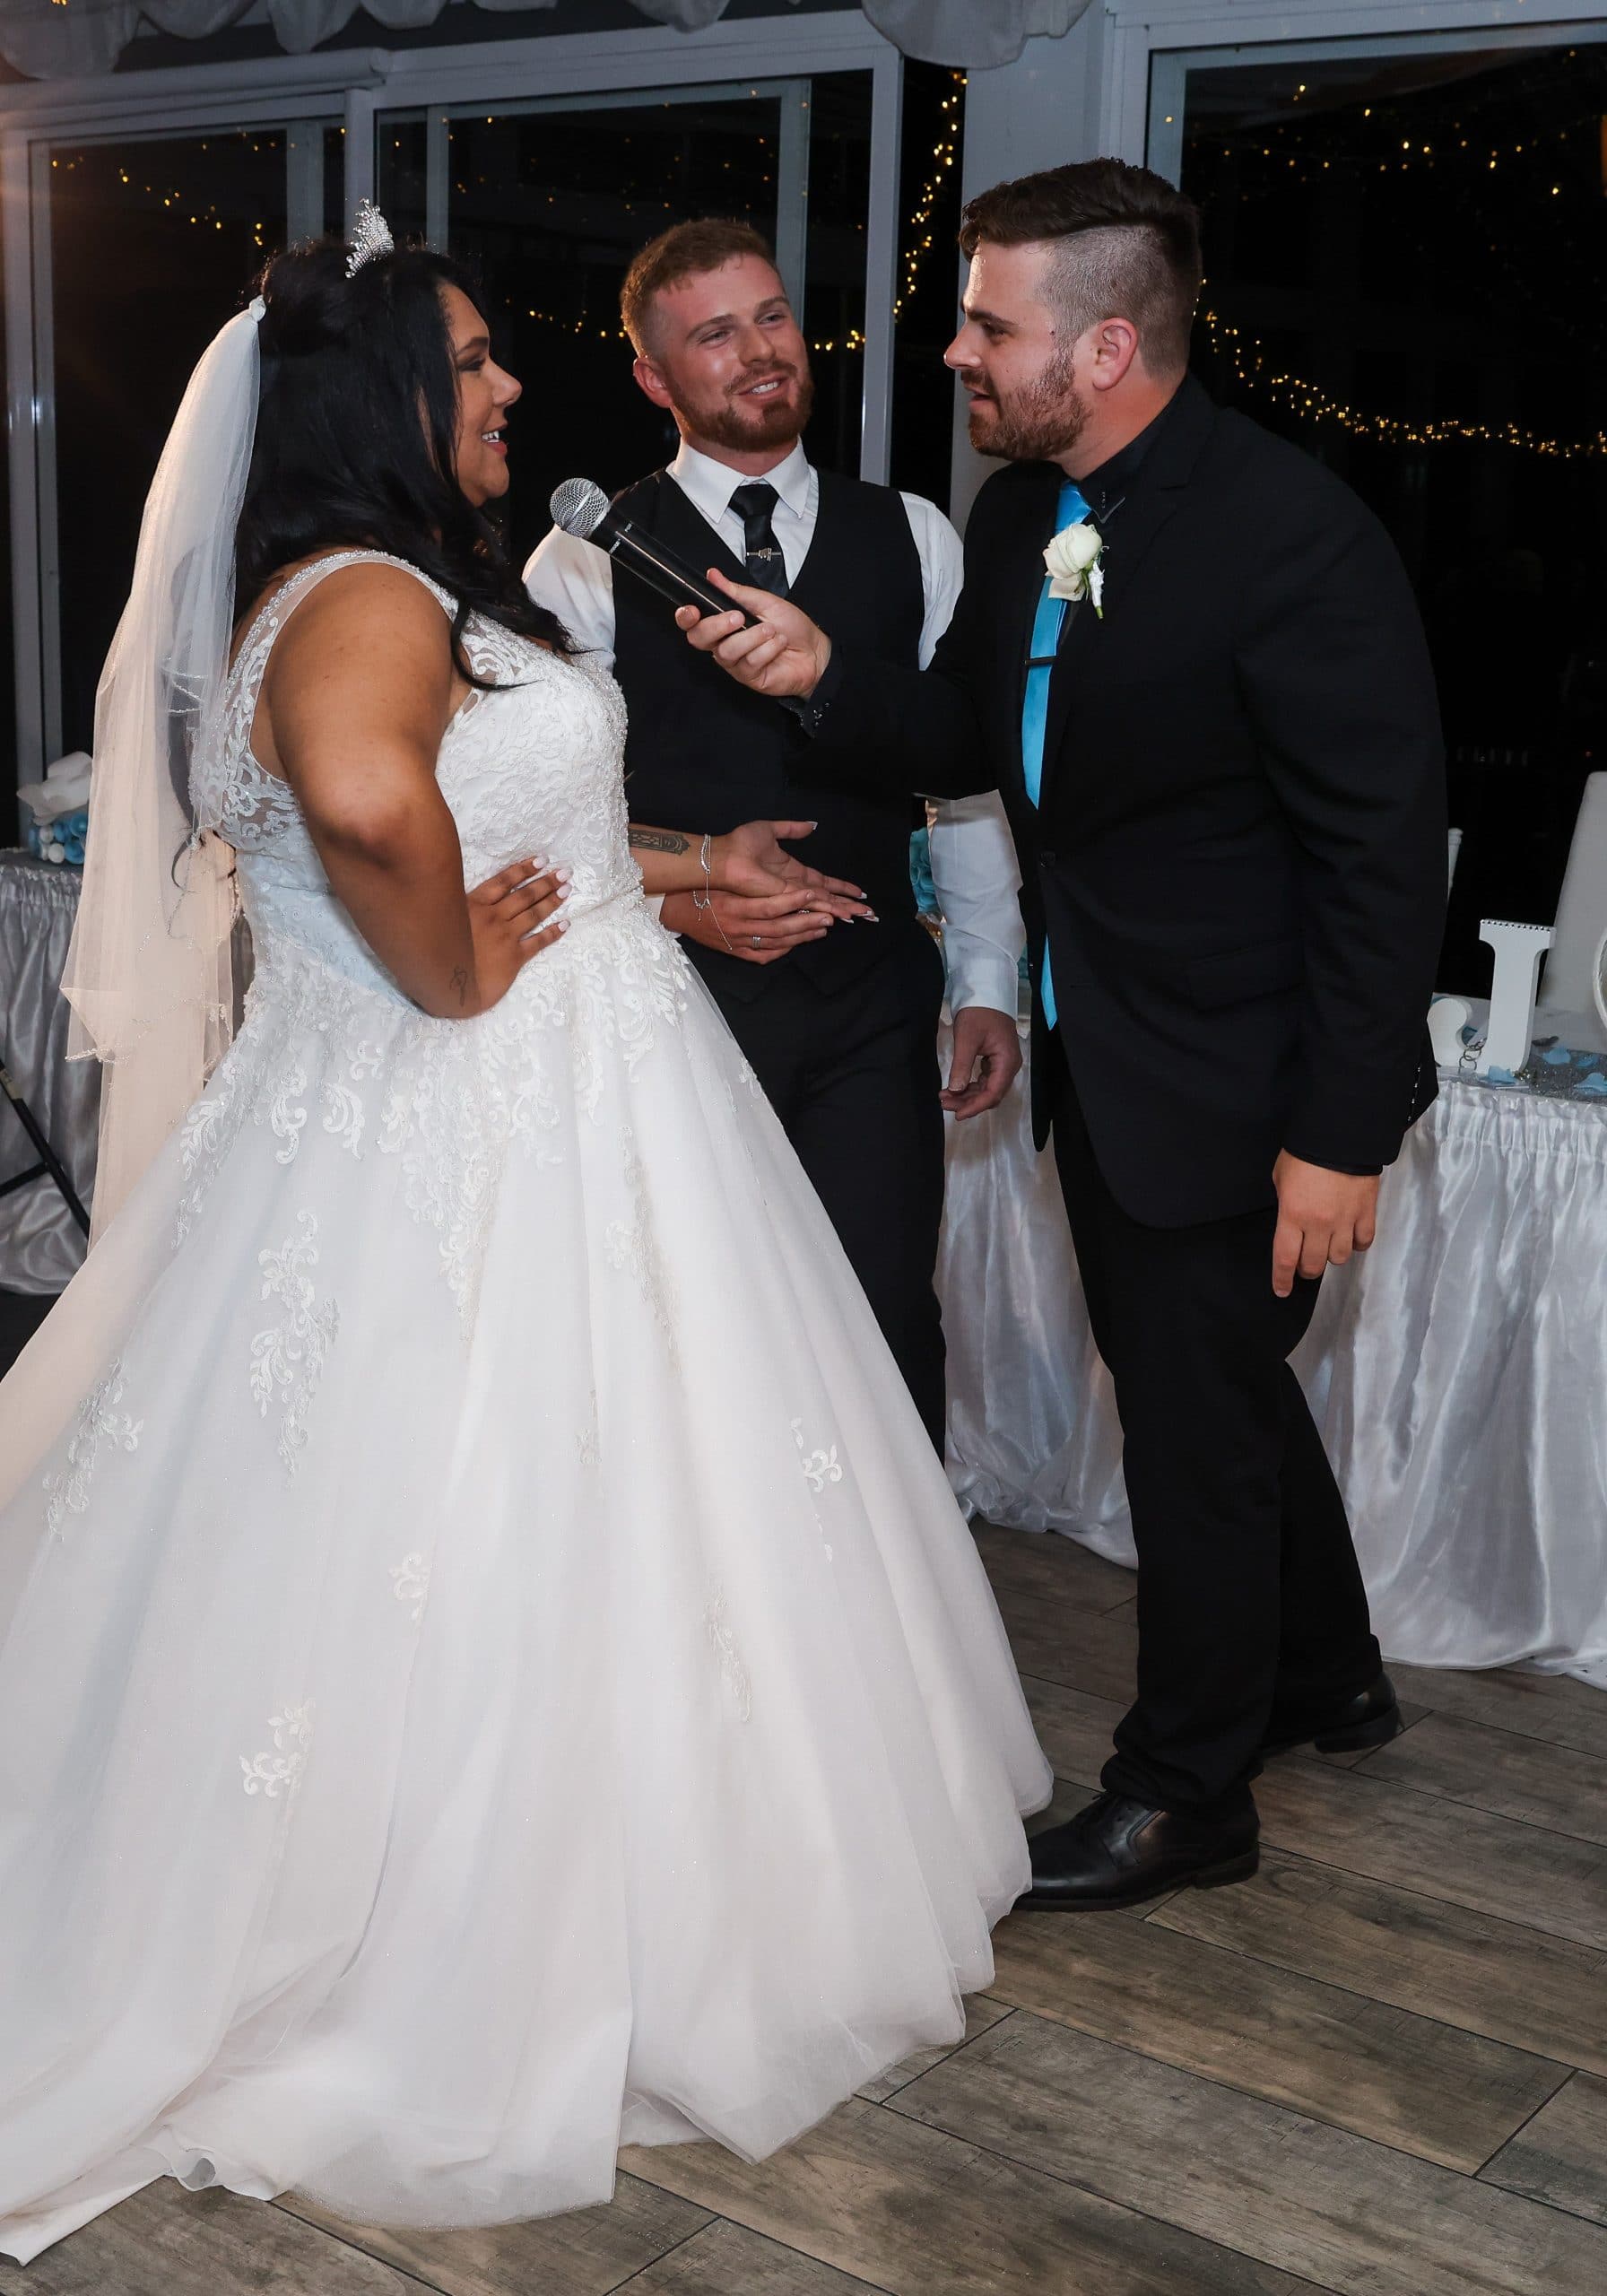 Nathan Cassar asking a bride a question while standing next to the groom